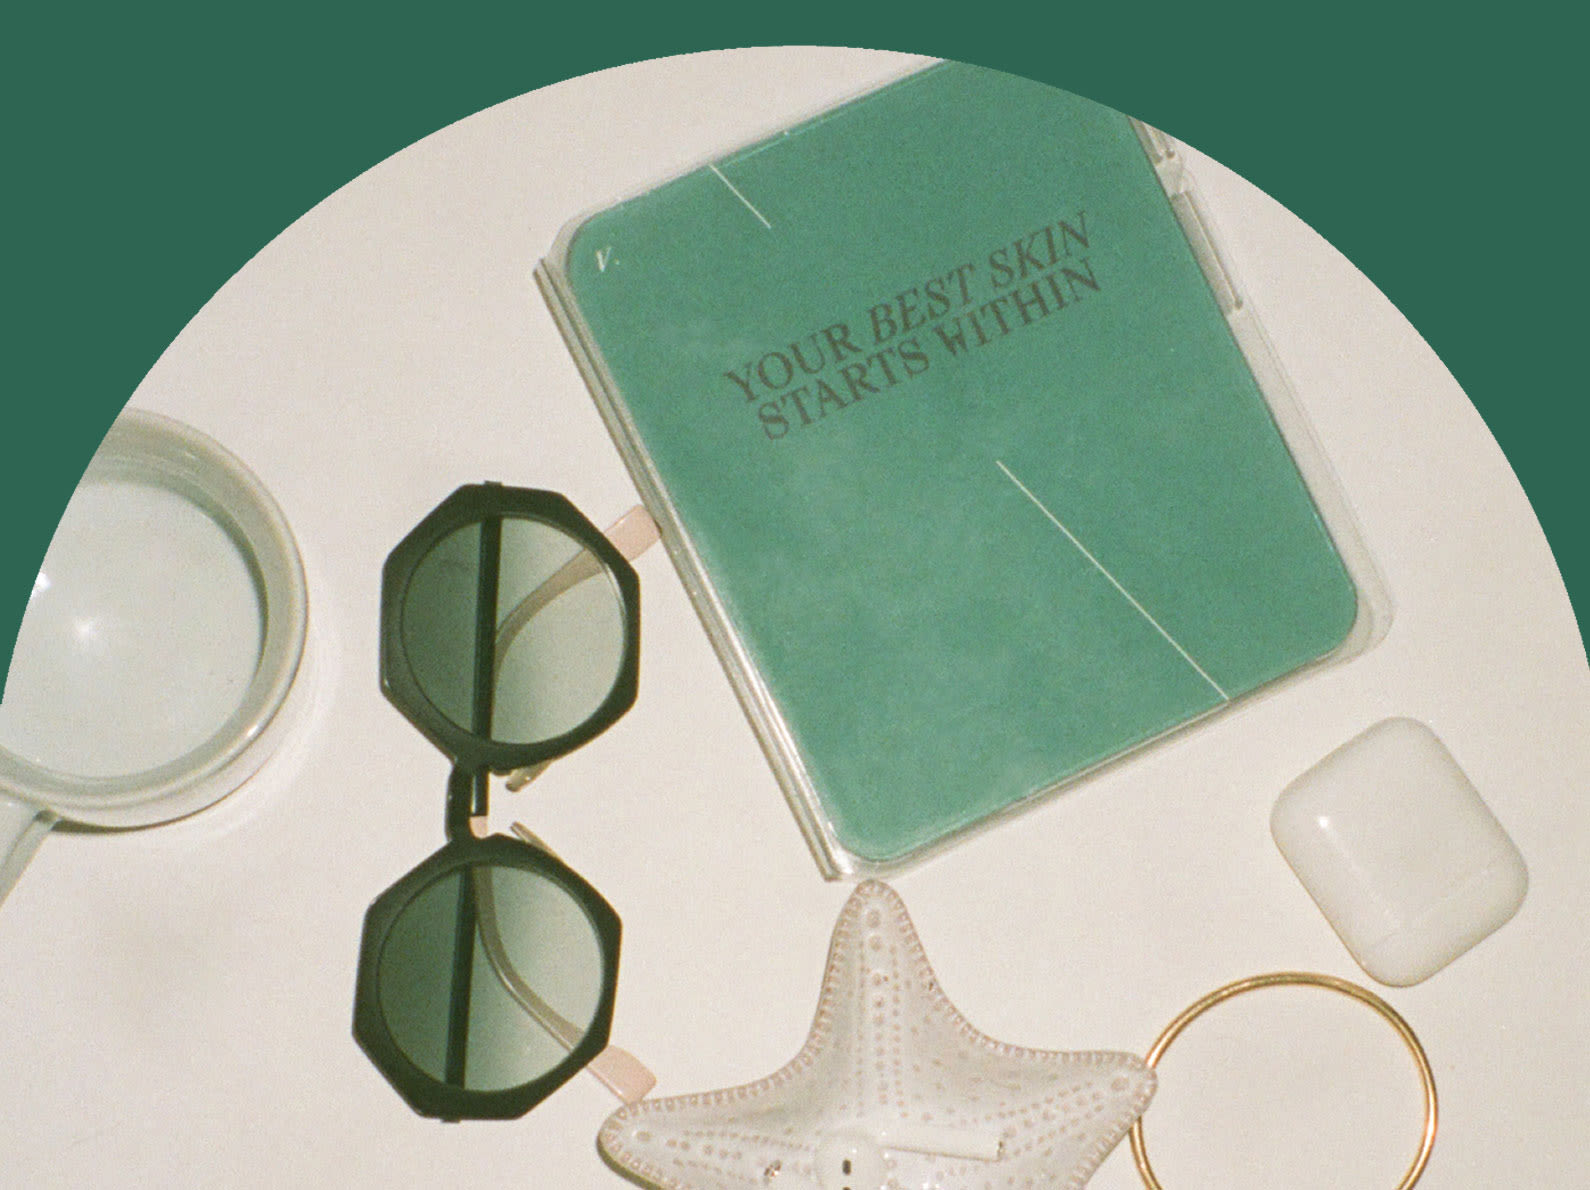 Veracity skin and health test kit with sunglasses, coffee mug, gold bangle, and airpods in a starfish dish.